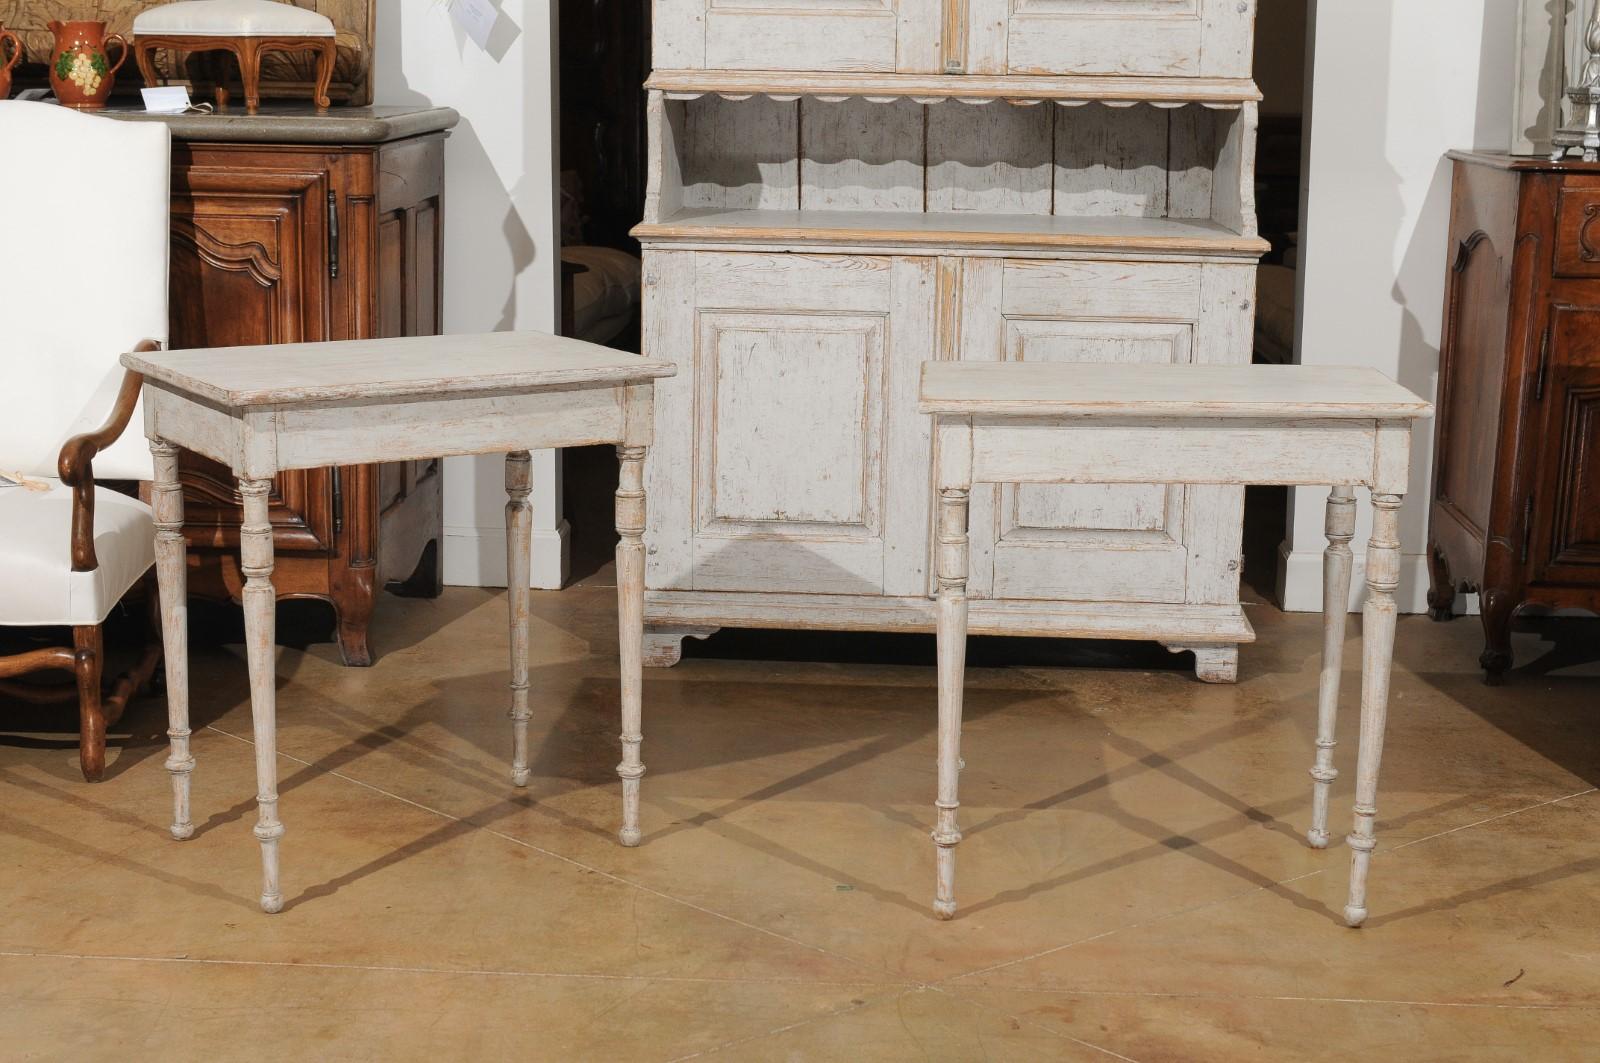 A pair of Swedish painted tables from the 19th century, with turned legs and distressed finish. Created in Sweden during the 19th century, each of this pair of painted tables features a rectangular top sitting above a simple apron. Raised on four